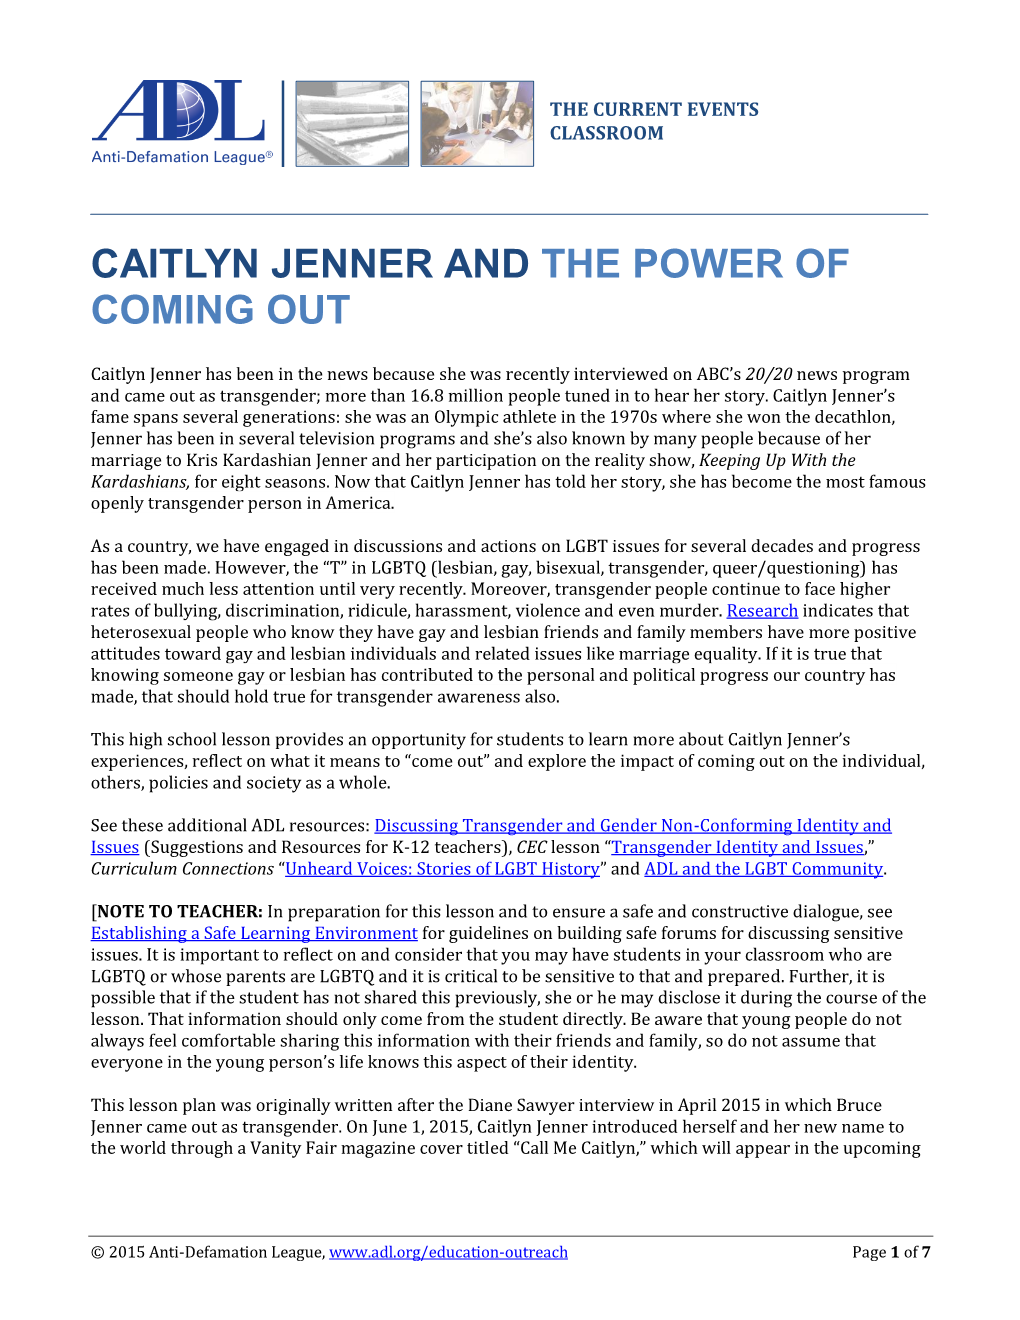 Caitlyn Jenner and the Power of Coming Out